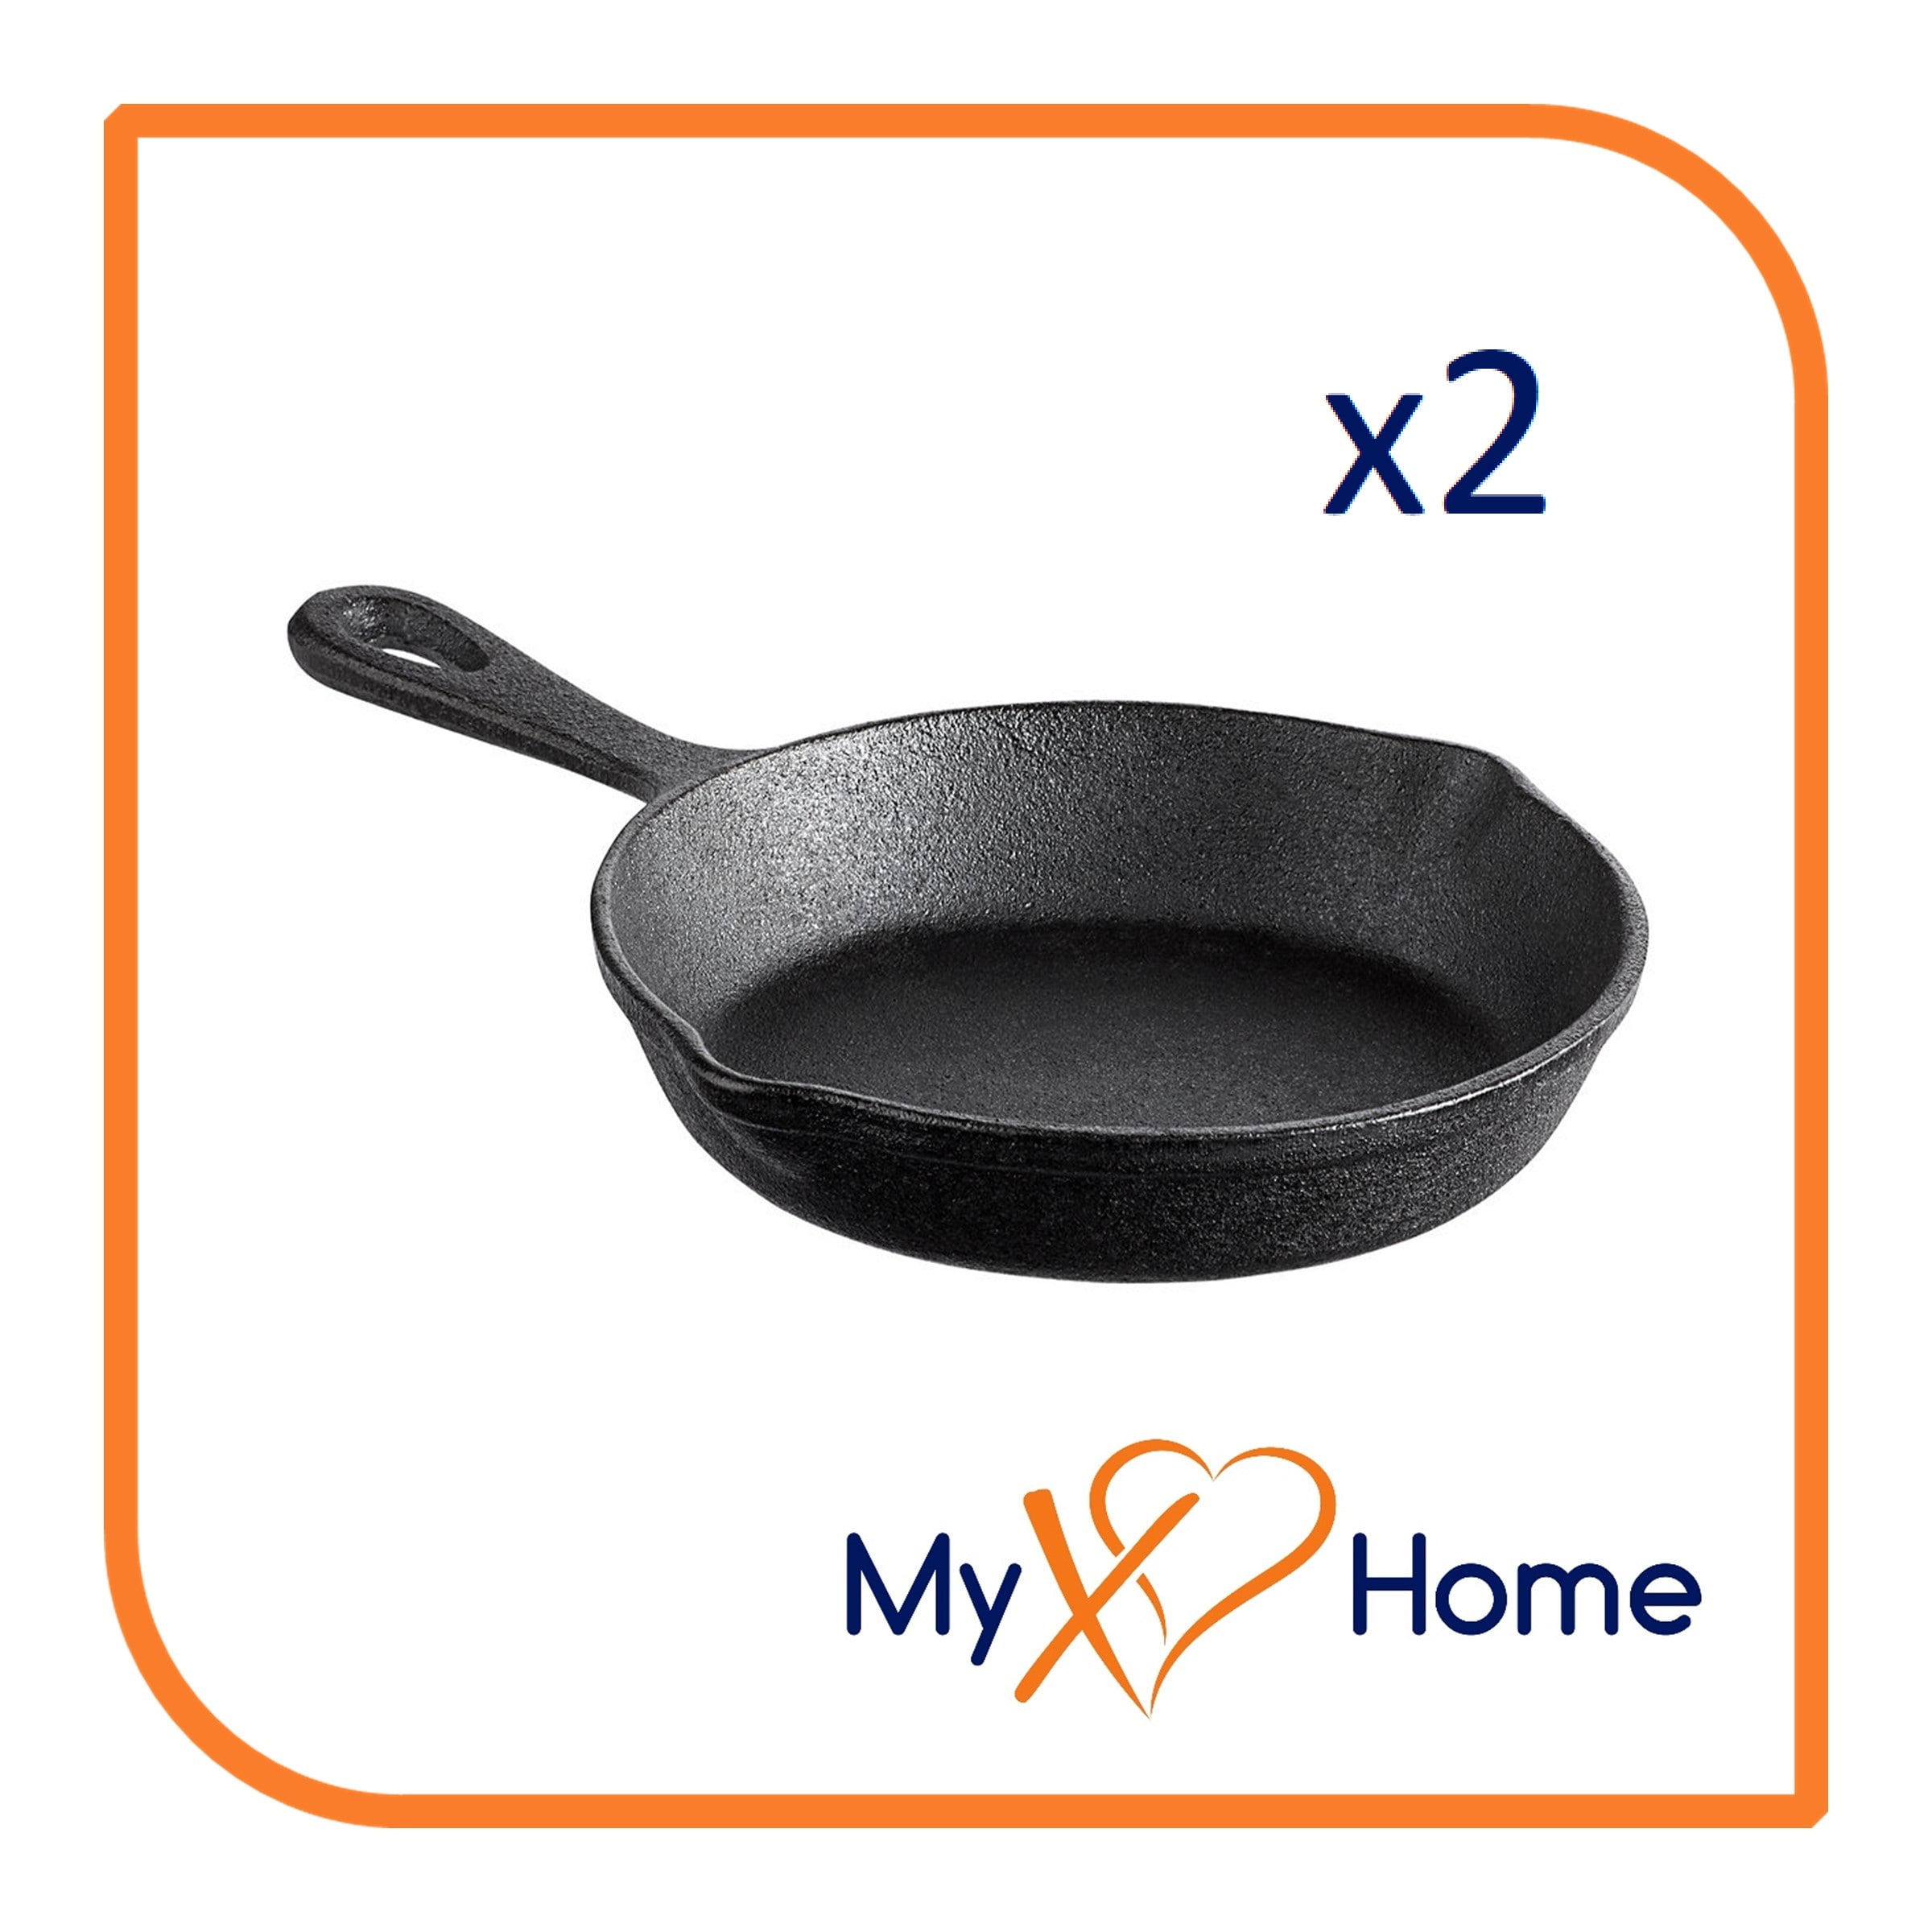 MyXOHome 6" Round Cast Iron Frying Pan 1 Skillet Skillet with Handle 